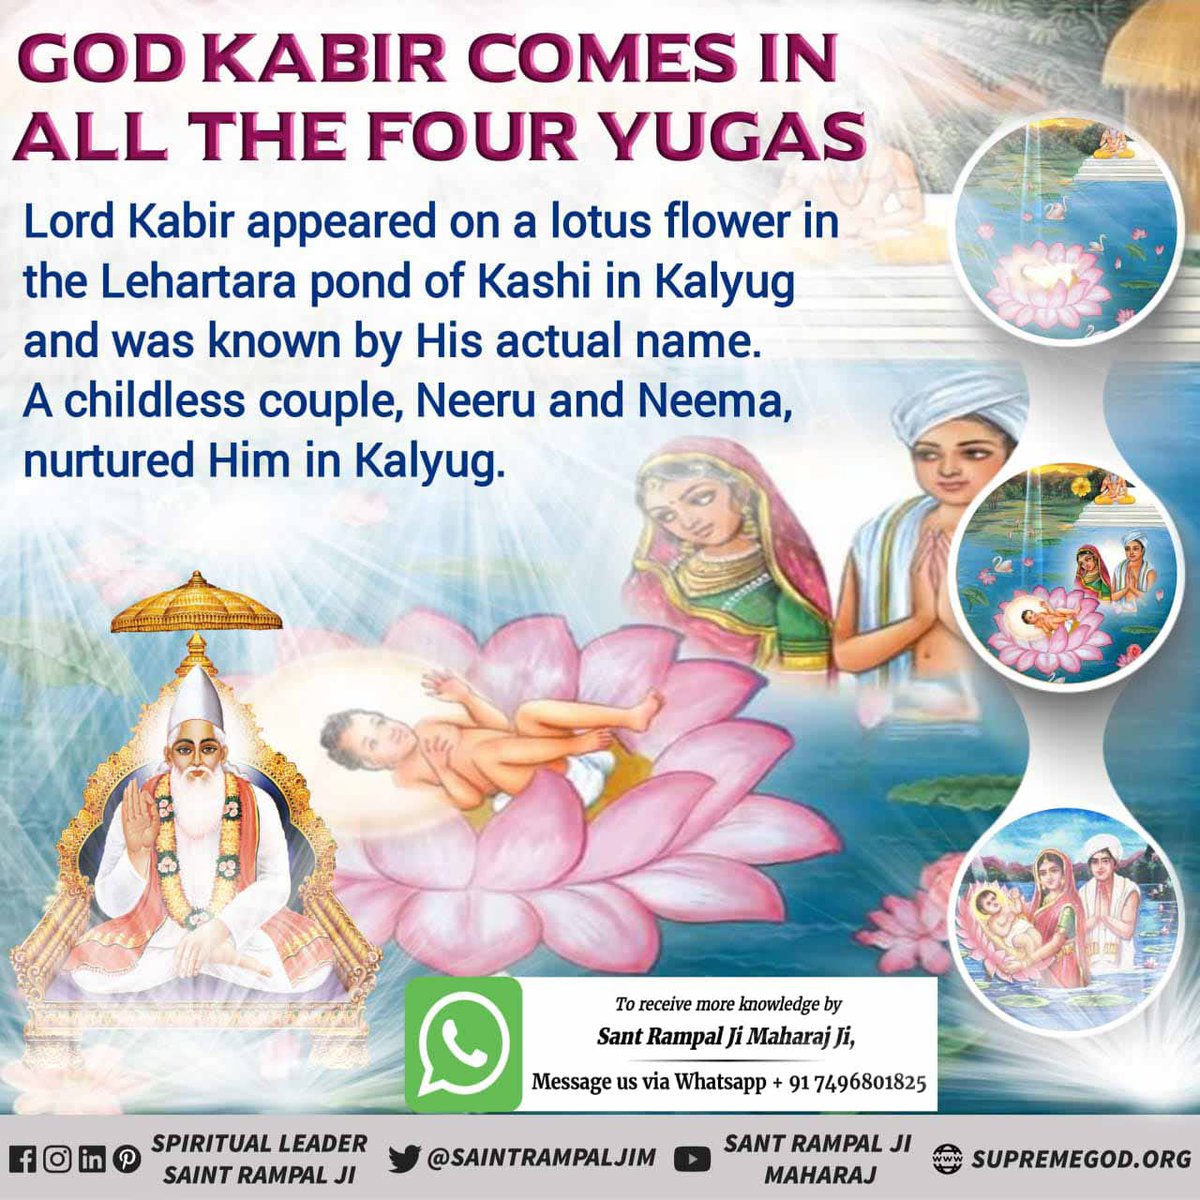 #अविनाशी_परमात्मा_कबीर Supreme God created the five elements, earth, sky, air, water etc. for all the living beings to reside in. He Himself is the witness of the nature created by Him. Sant Rampal Ji Maharaj